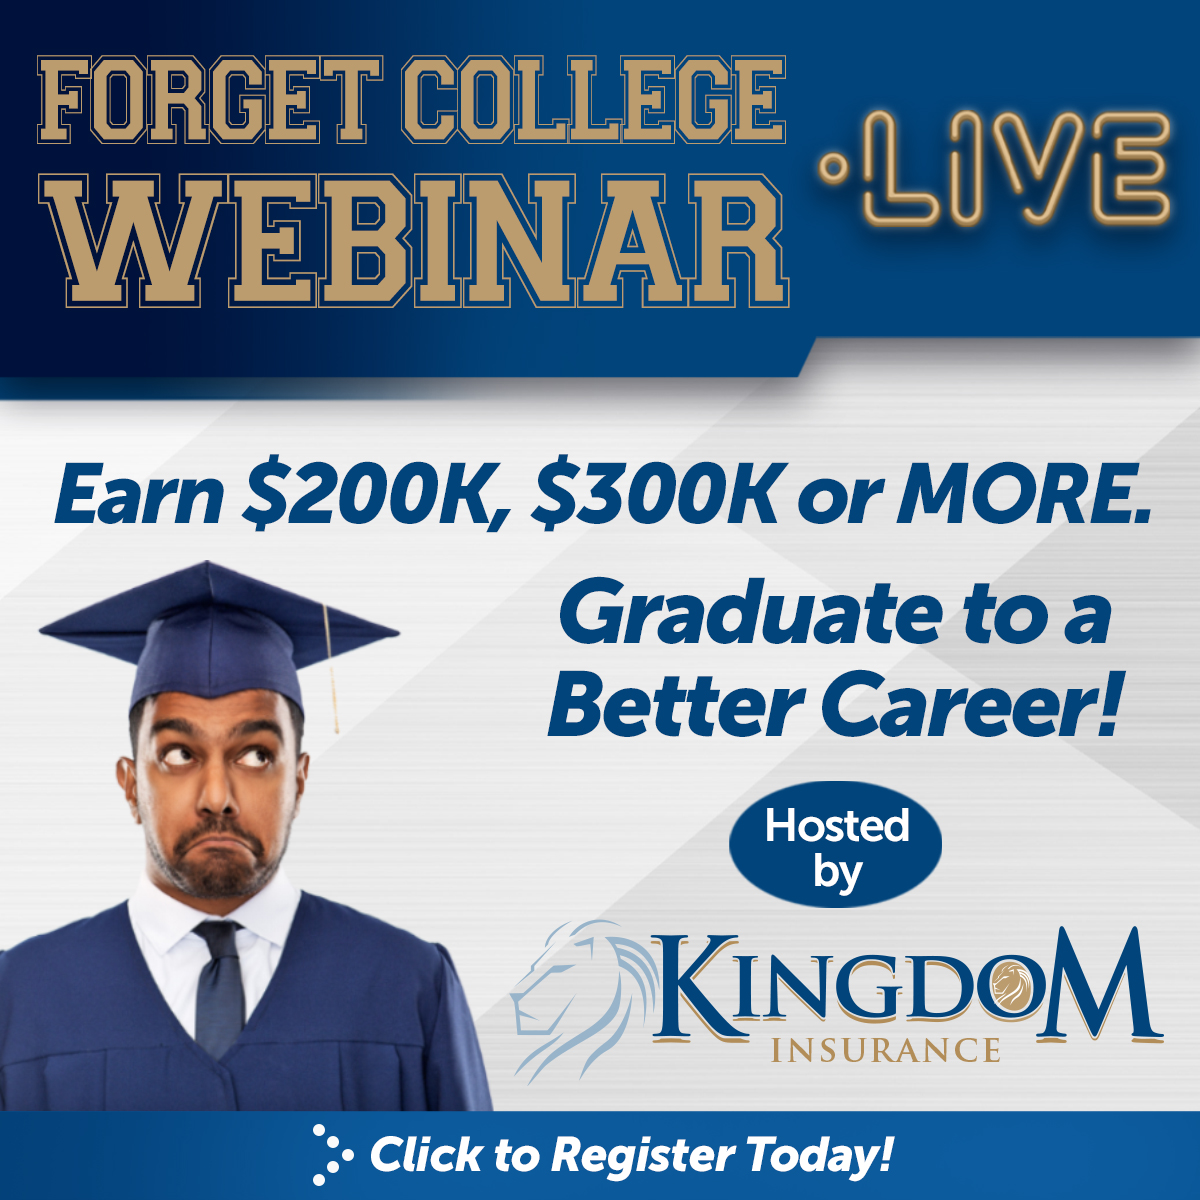 Forget College Webinar LIVE! Earn $200, $300, or more per year. Graduate to a Better Career! Hosted by Kingdom Insurance.